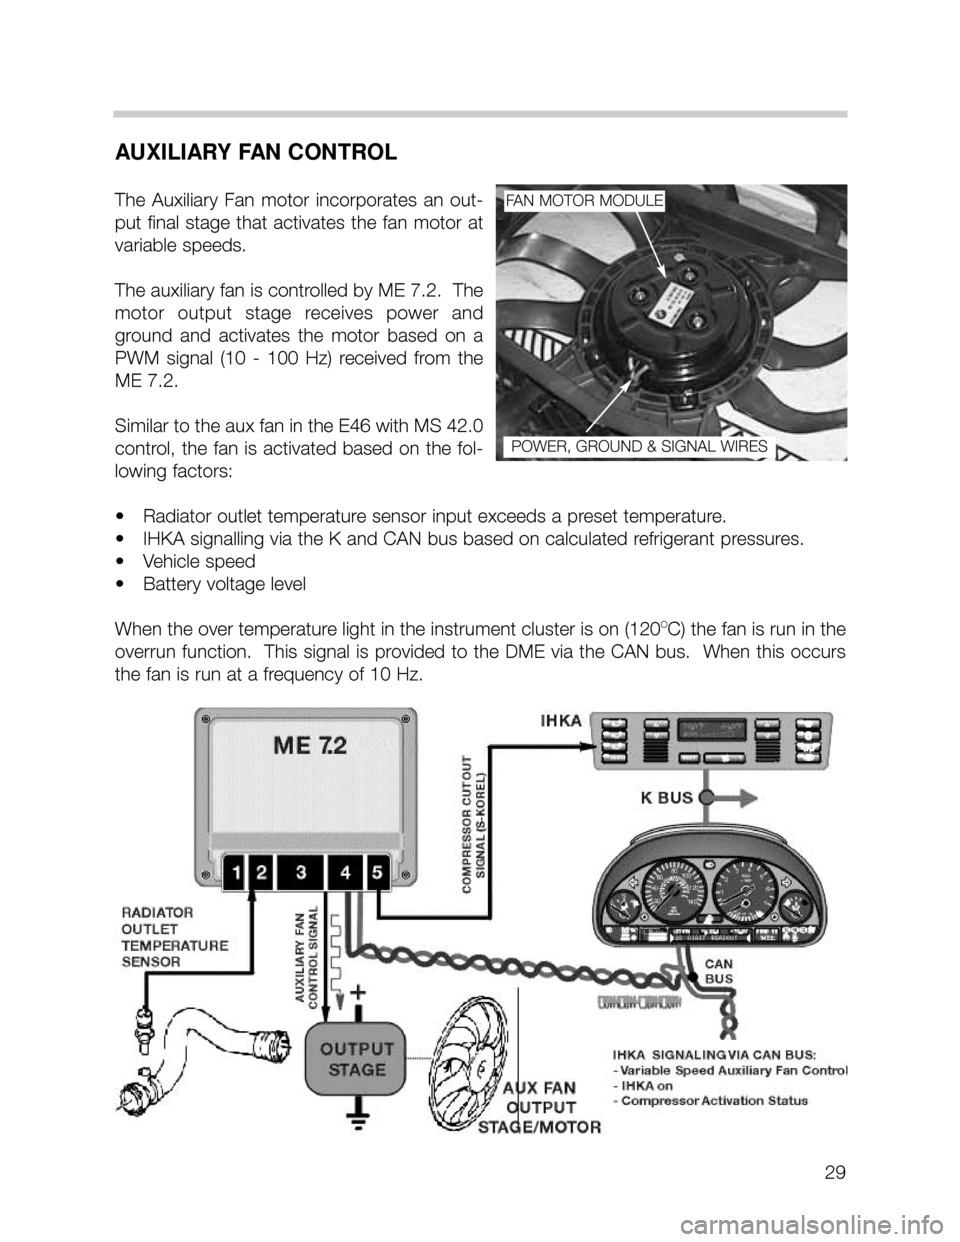 BMW 740i 2000 E38 M62TU Engine Workshop Manual 29
AUXILIARY FAN CONTROL
The  Auxiliary  Fan  motor  incorporates  an  out-
put  final  stage  that  activates  the  fan  motor  at
variable speeds.  
The auxiliary fan is controlled by ME 7.2.  The
m